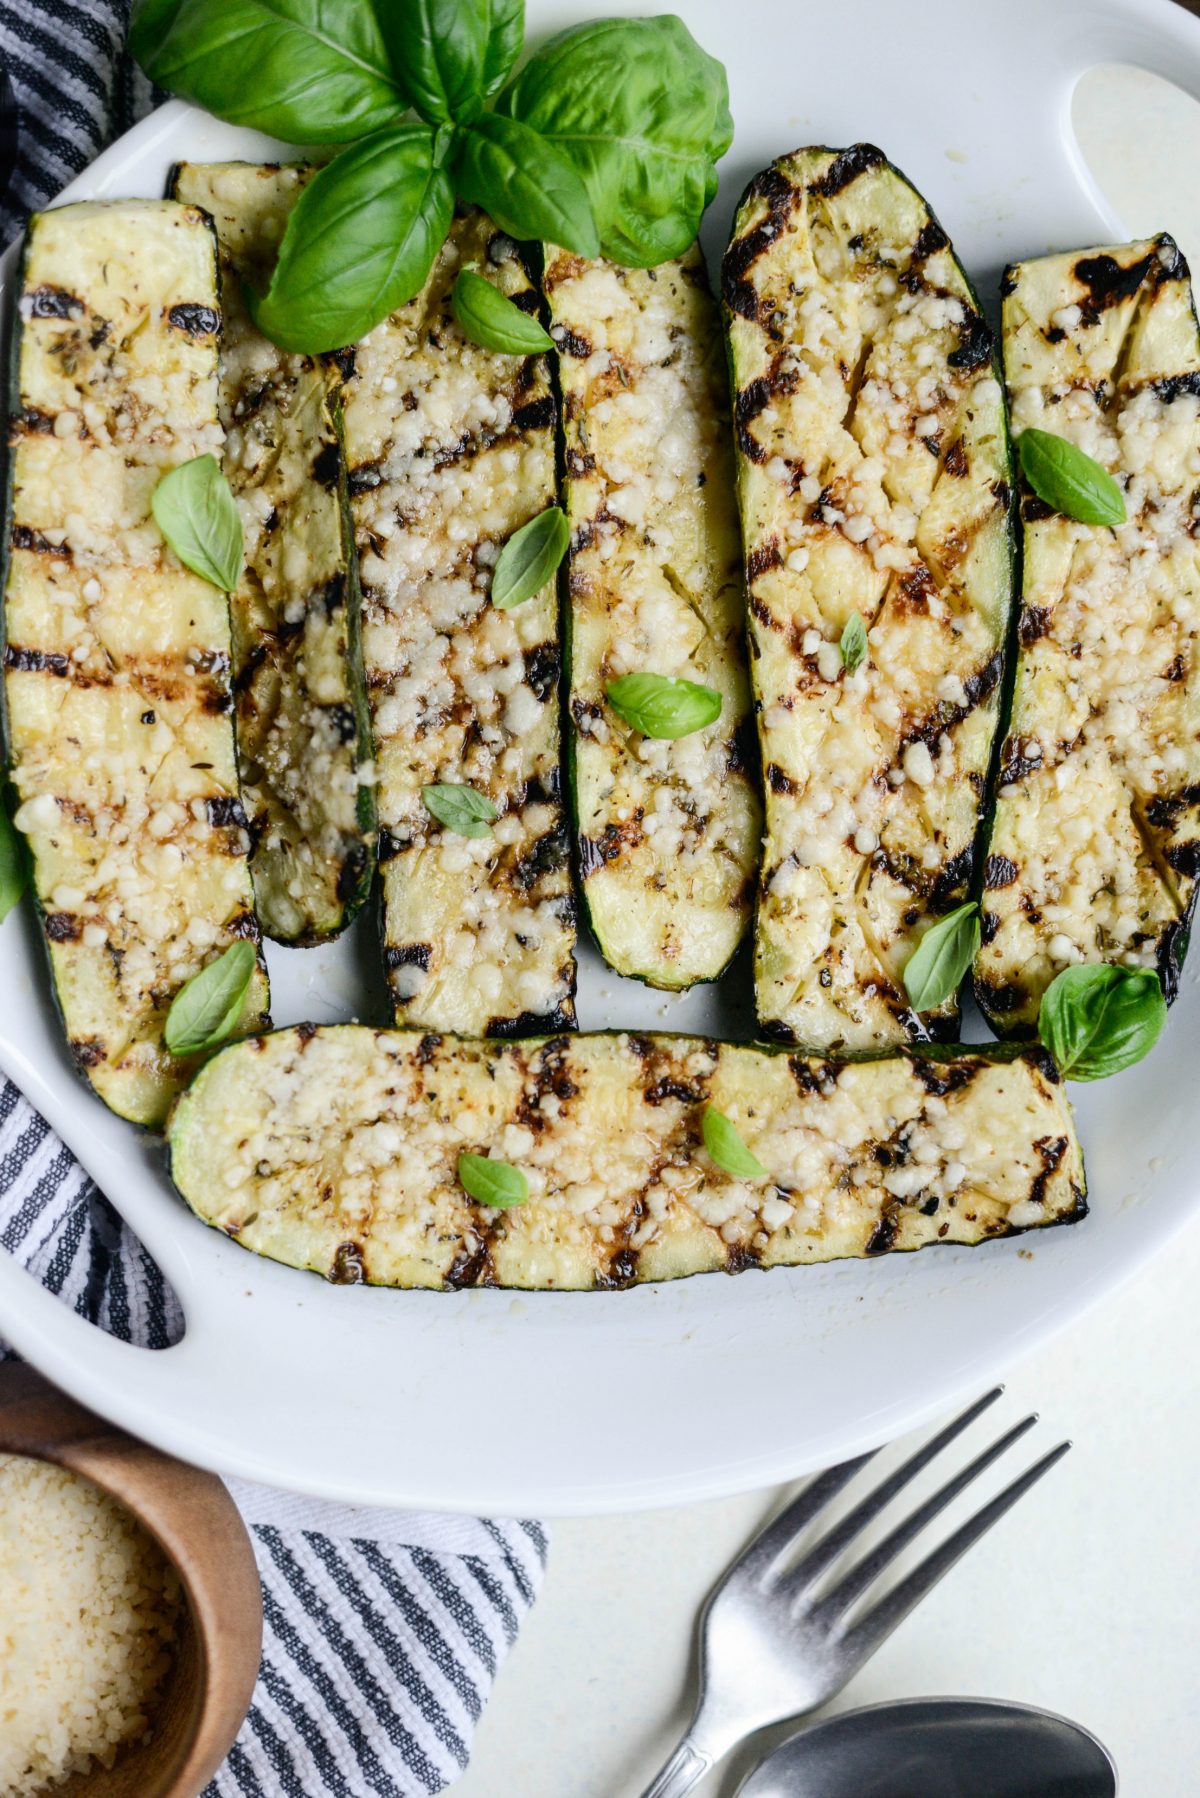 Grilled Zucchini with Lemon, Garlic and Parmesan